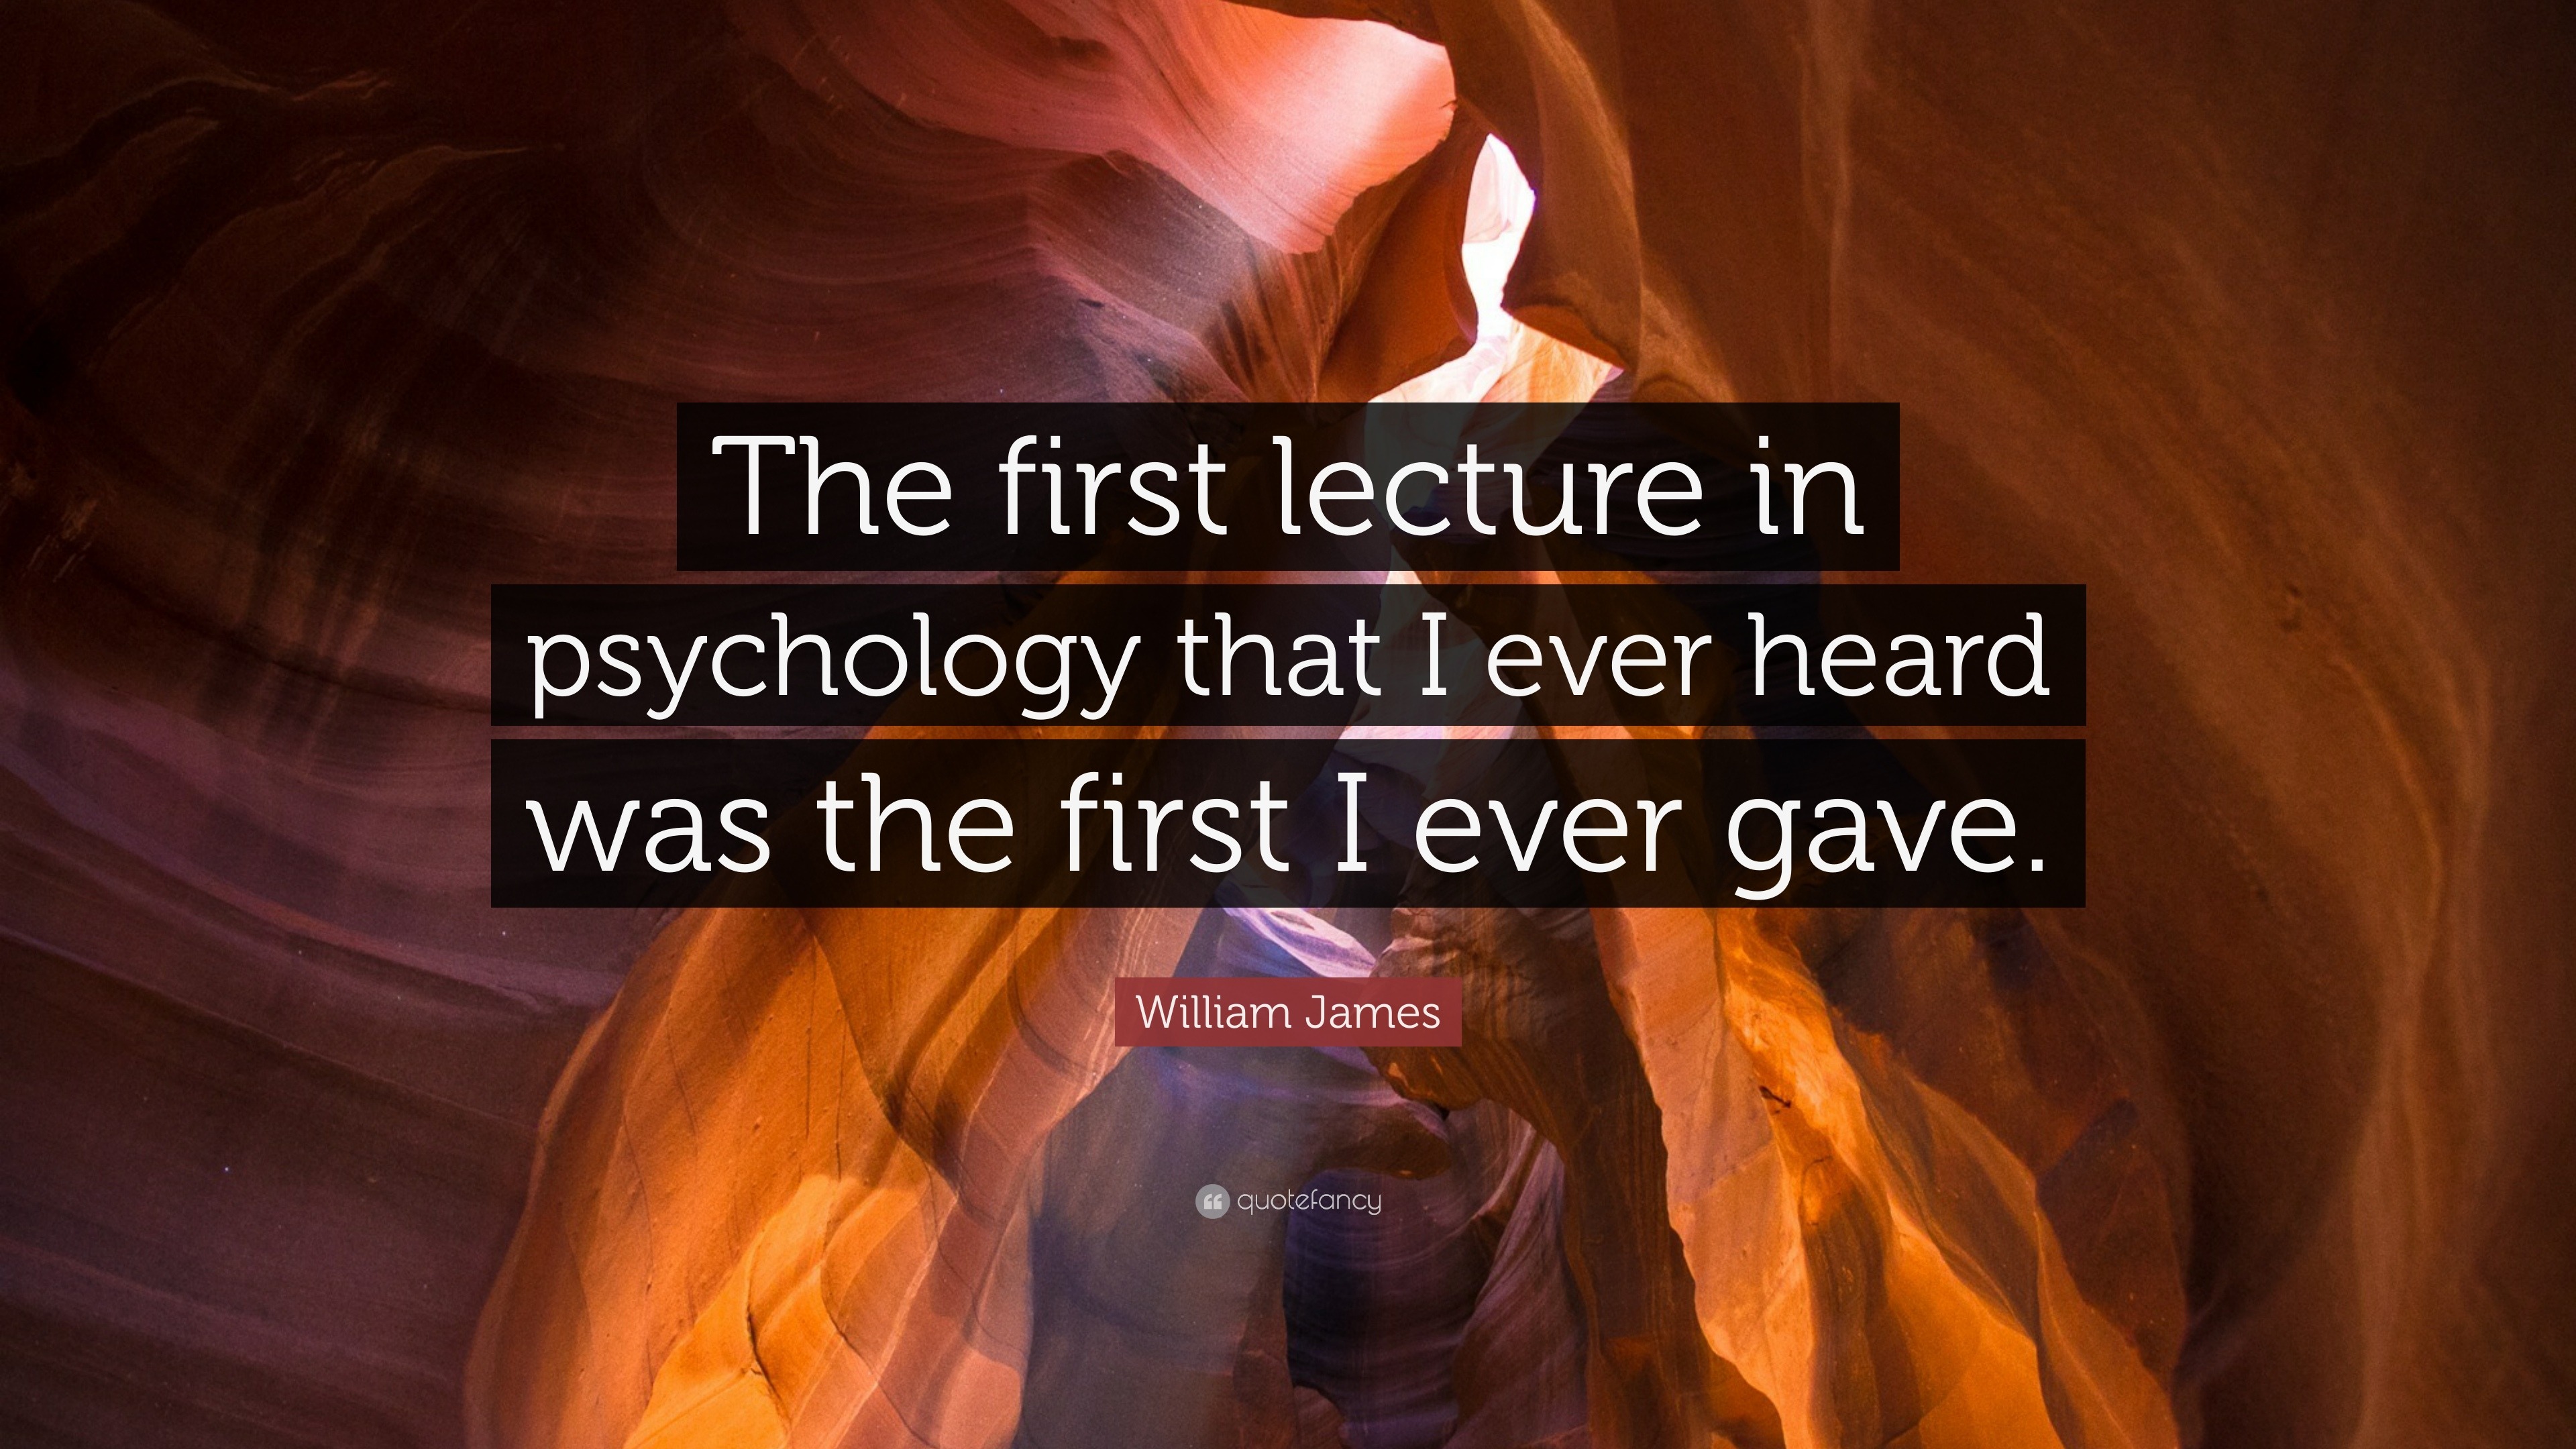 William James Quote: “The first lecture in psychology that I ever heard ...